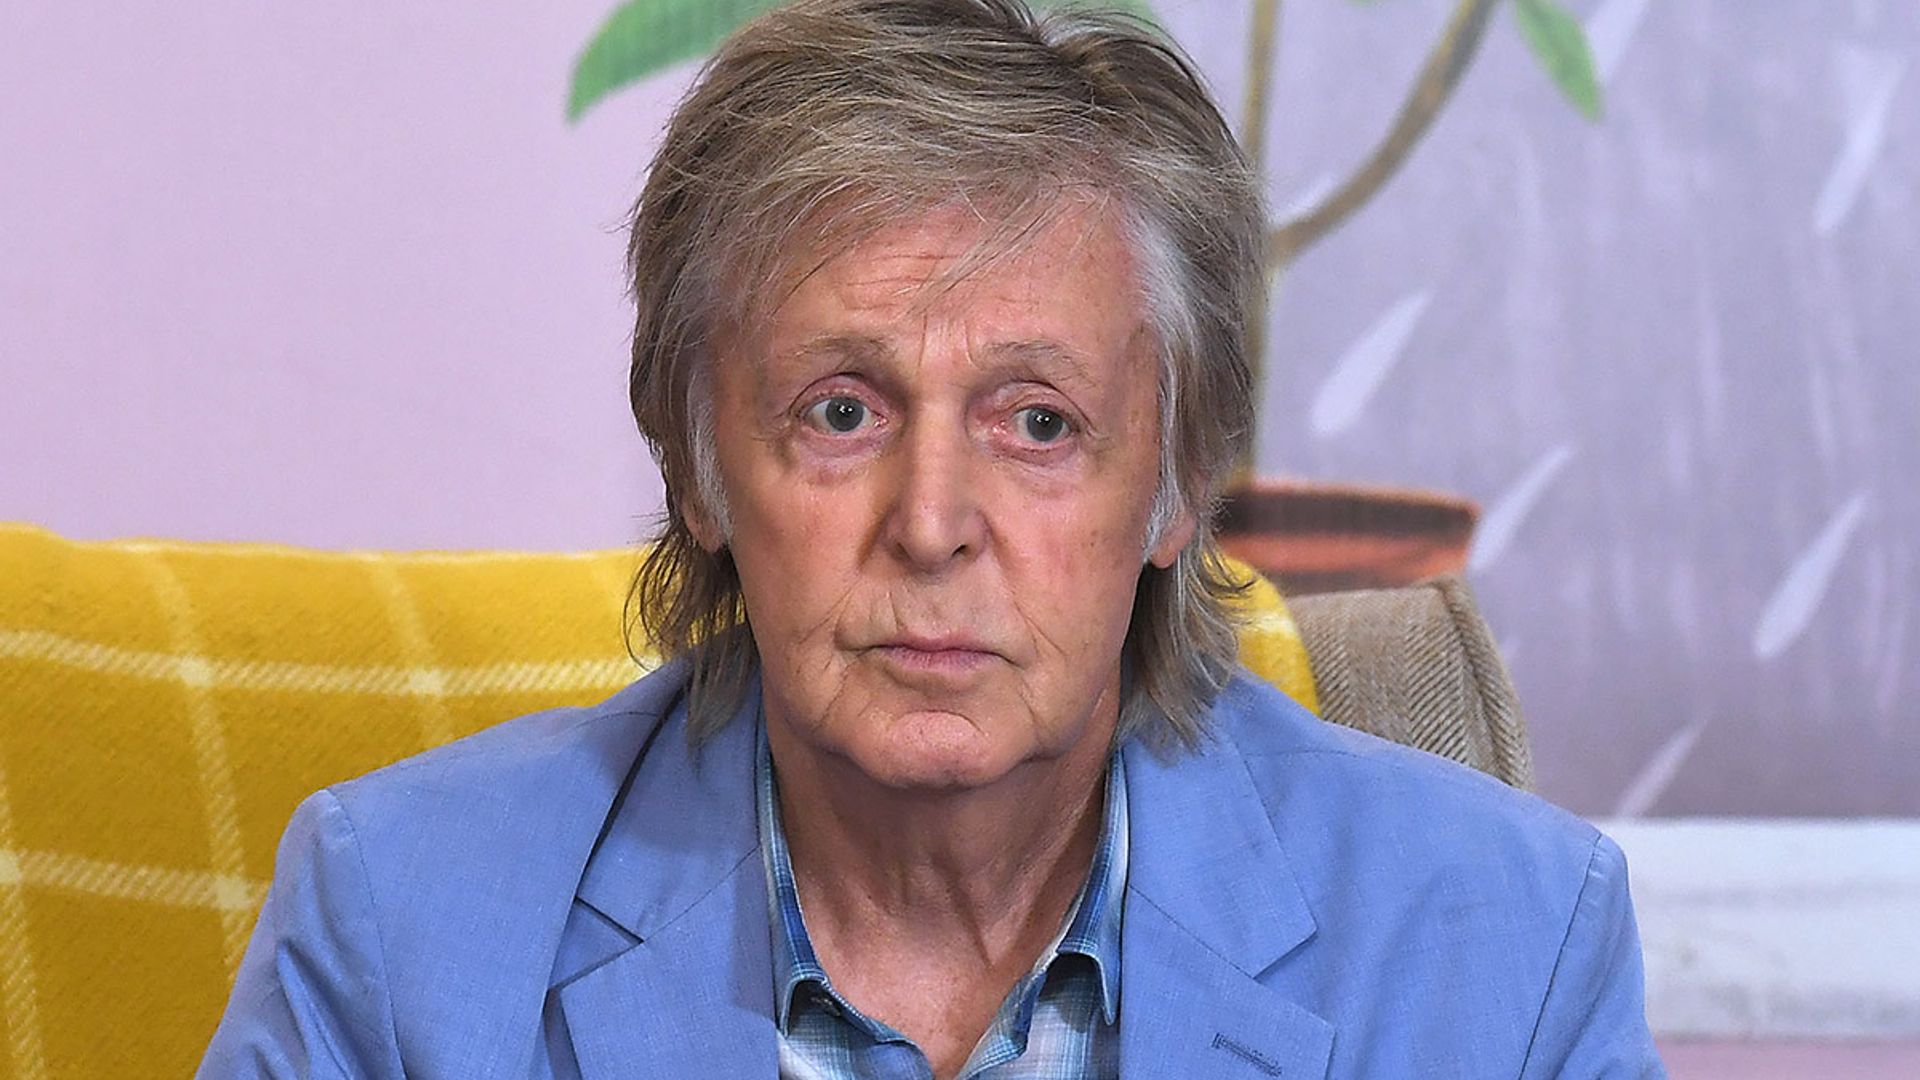 Paul McCartney inundated with support as he mourns devastating